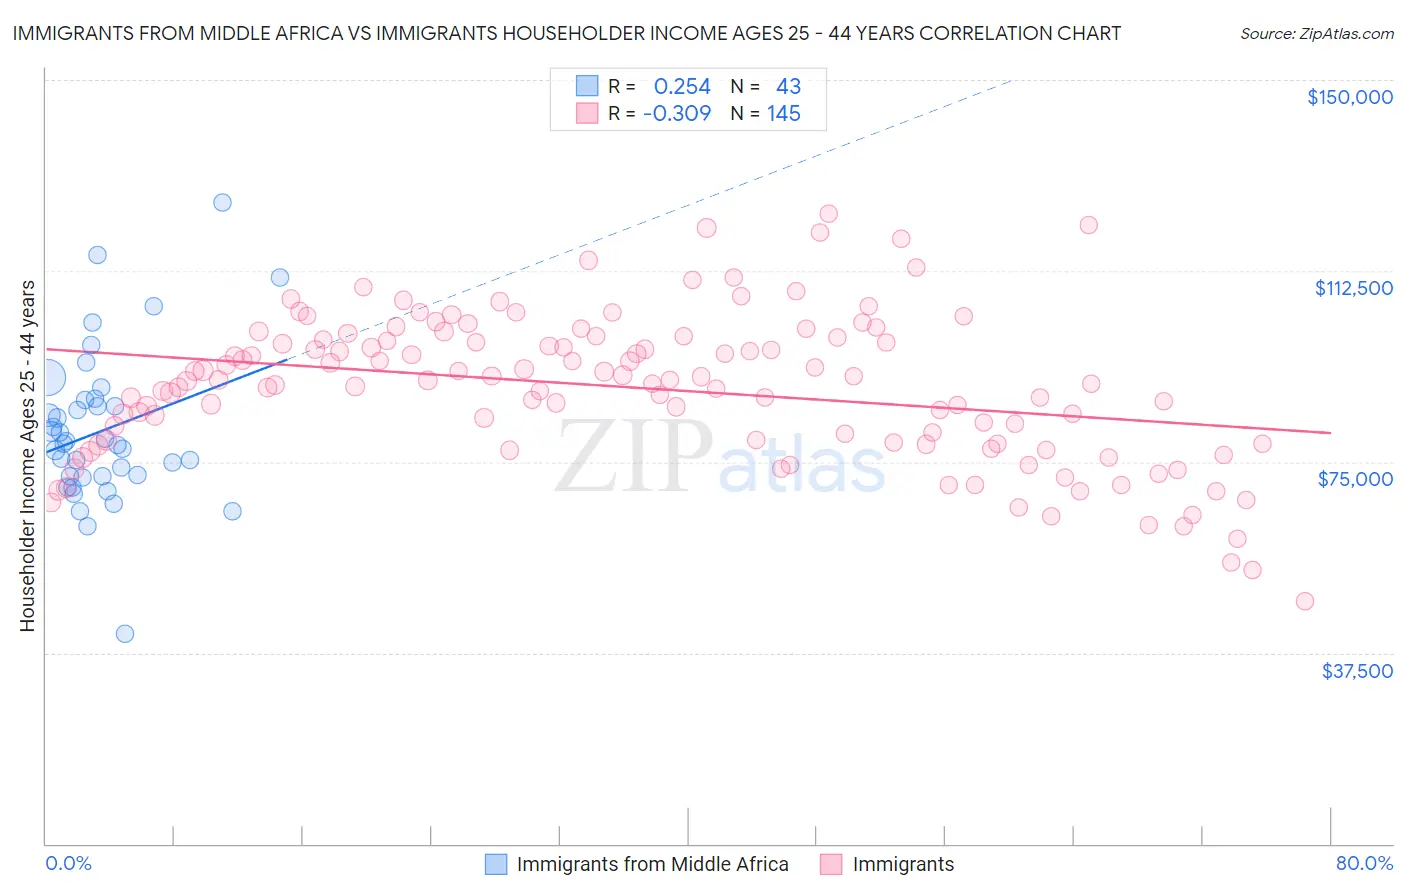 Immigrants from Middle Africa vs Immigrants Householder Income Ages 25 - 44 years